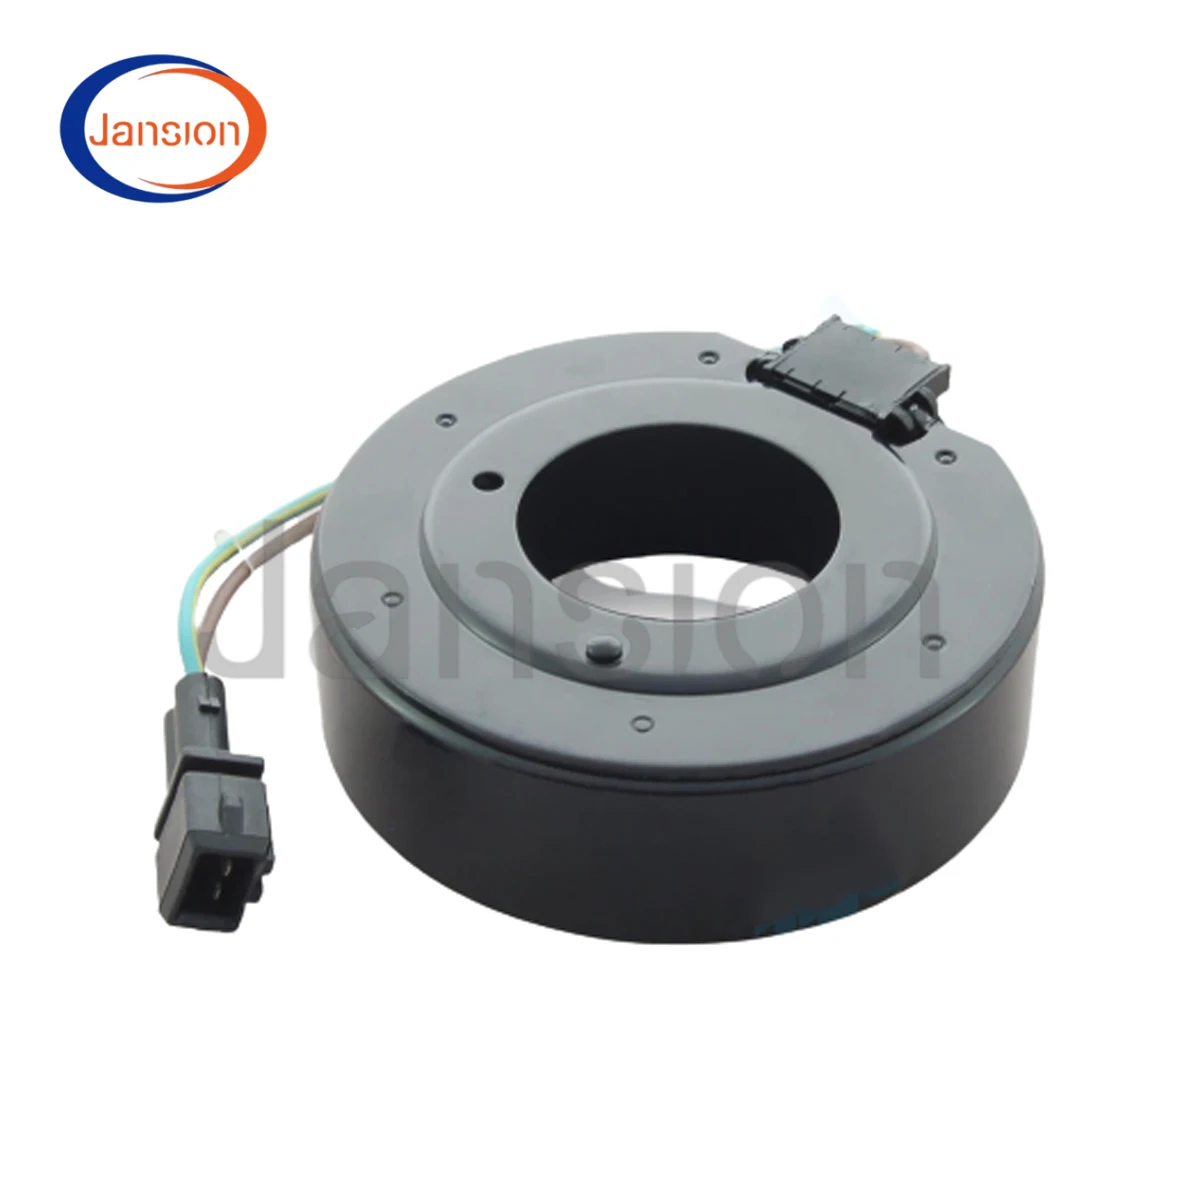 

AC A/C Air Conditioning Compressor Coil 7V16 For VW NEW BEETLE BORA AUDI A3 FORD GALAXY SEAT LEON 1.4 701820805Q 7D0820805